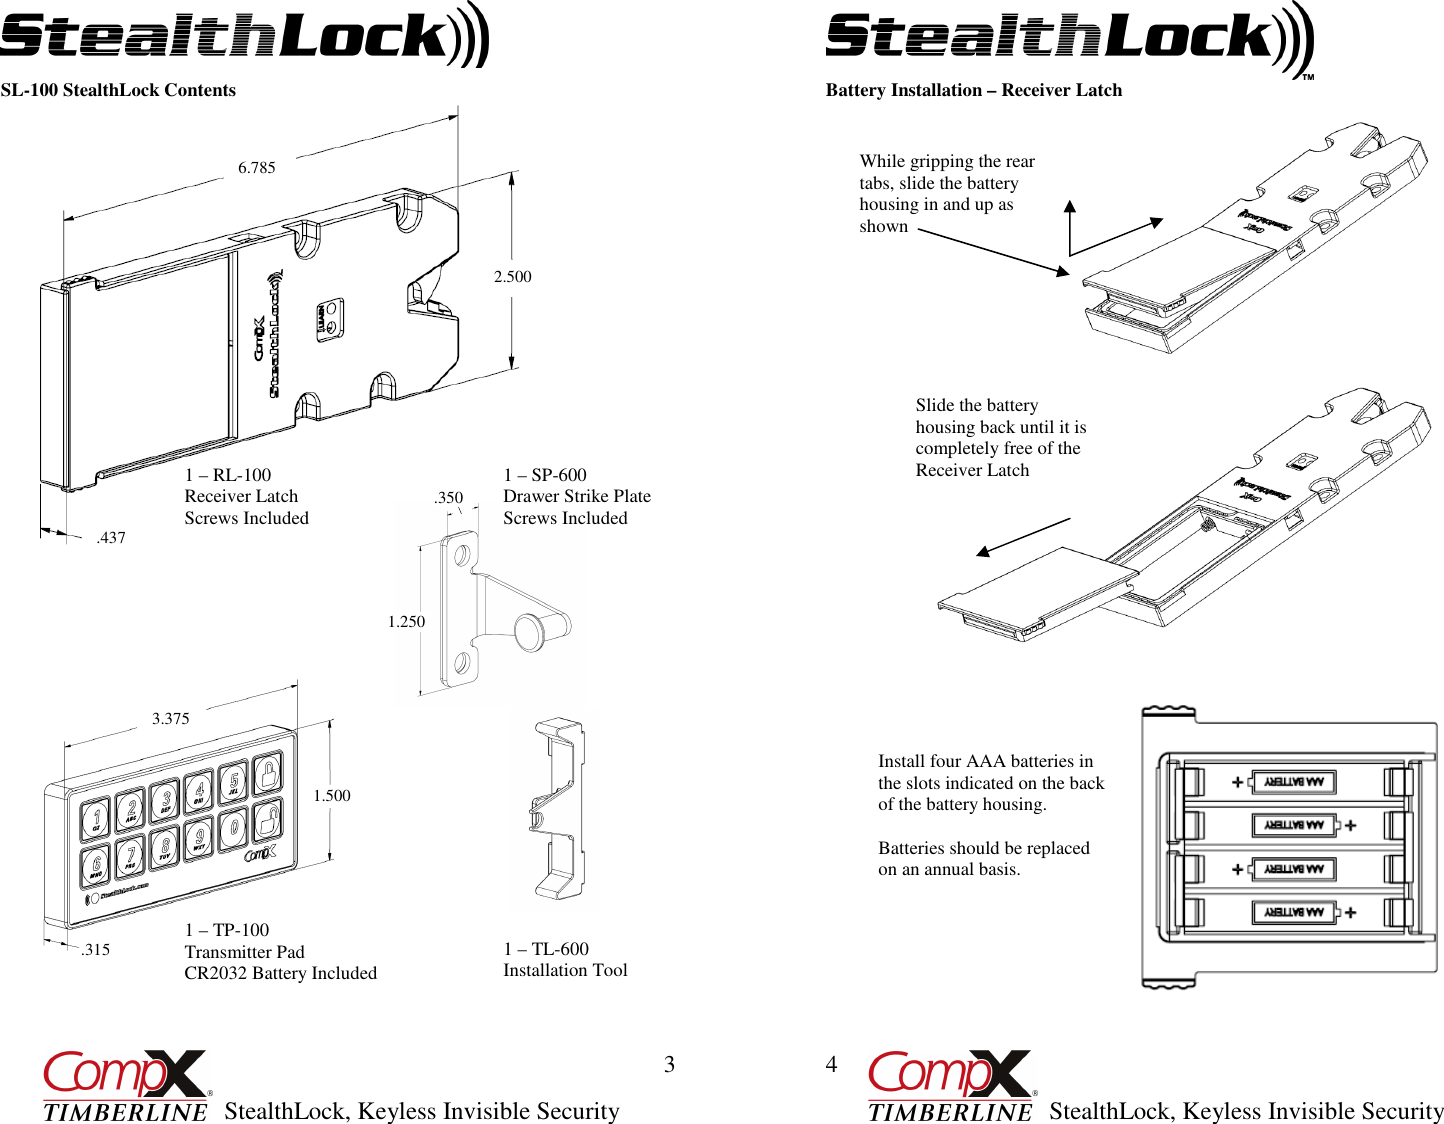         StealthLock, Keyless Invisible Security  3 1 – TL-600 Installation Tool 1 – SP-600  Drawer Strike Plate Screws Included 1 – TP-100 Transmitter Pad CR2032 Battery Included 1 – RL-100 Receiver Latch Screws Included SL-100 StealthLock Contents                                                                                                                                                                                                                                                                                                                                                                                   2.500 .437 6.785 3.375 .315 1.500 1.250    .350         StealthLock, Keyless Invisible Security  4 Battery Installation – Receiver Latch   While gripping the rear tabs, slide the battery housing in and up as shown Slide the battery housing back until it is completely free of the Receiver Latch Install four AAA batteries in the slots indicated on the back of the battery housing.  Batteries should be replaced on an annual basis. 